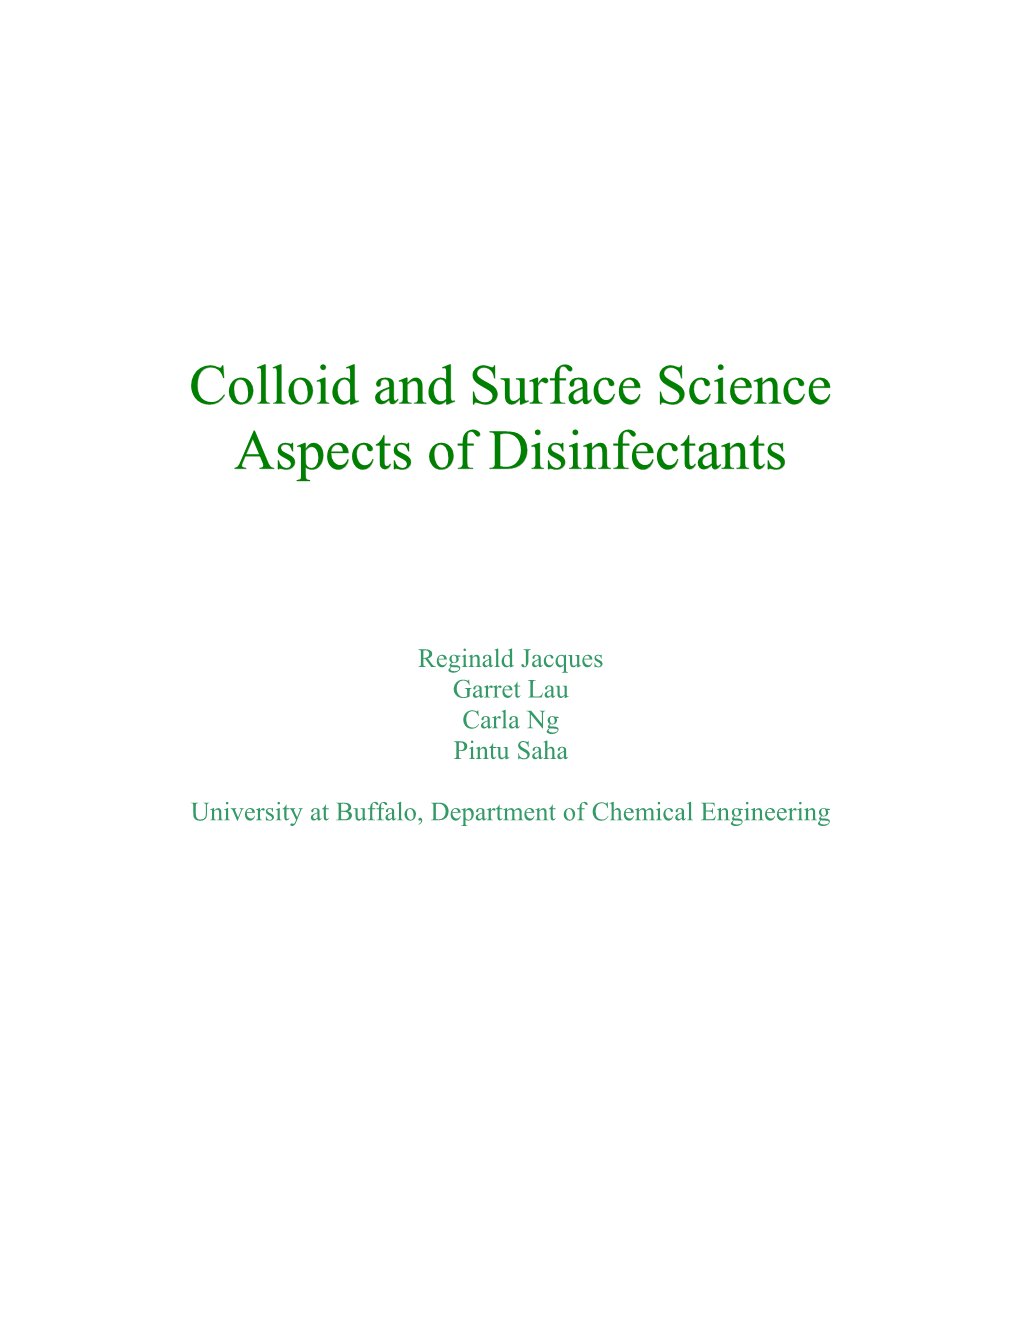 Colloid and Surface Science Aspects of Disinfectants